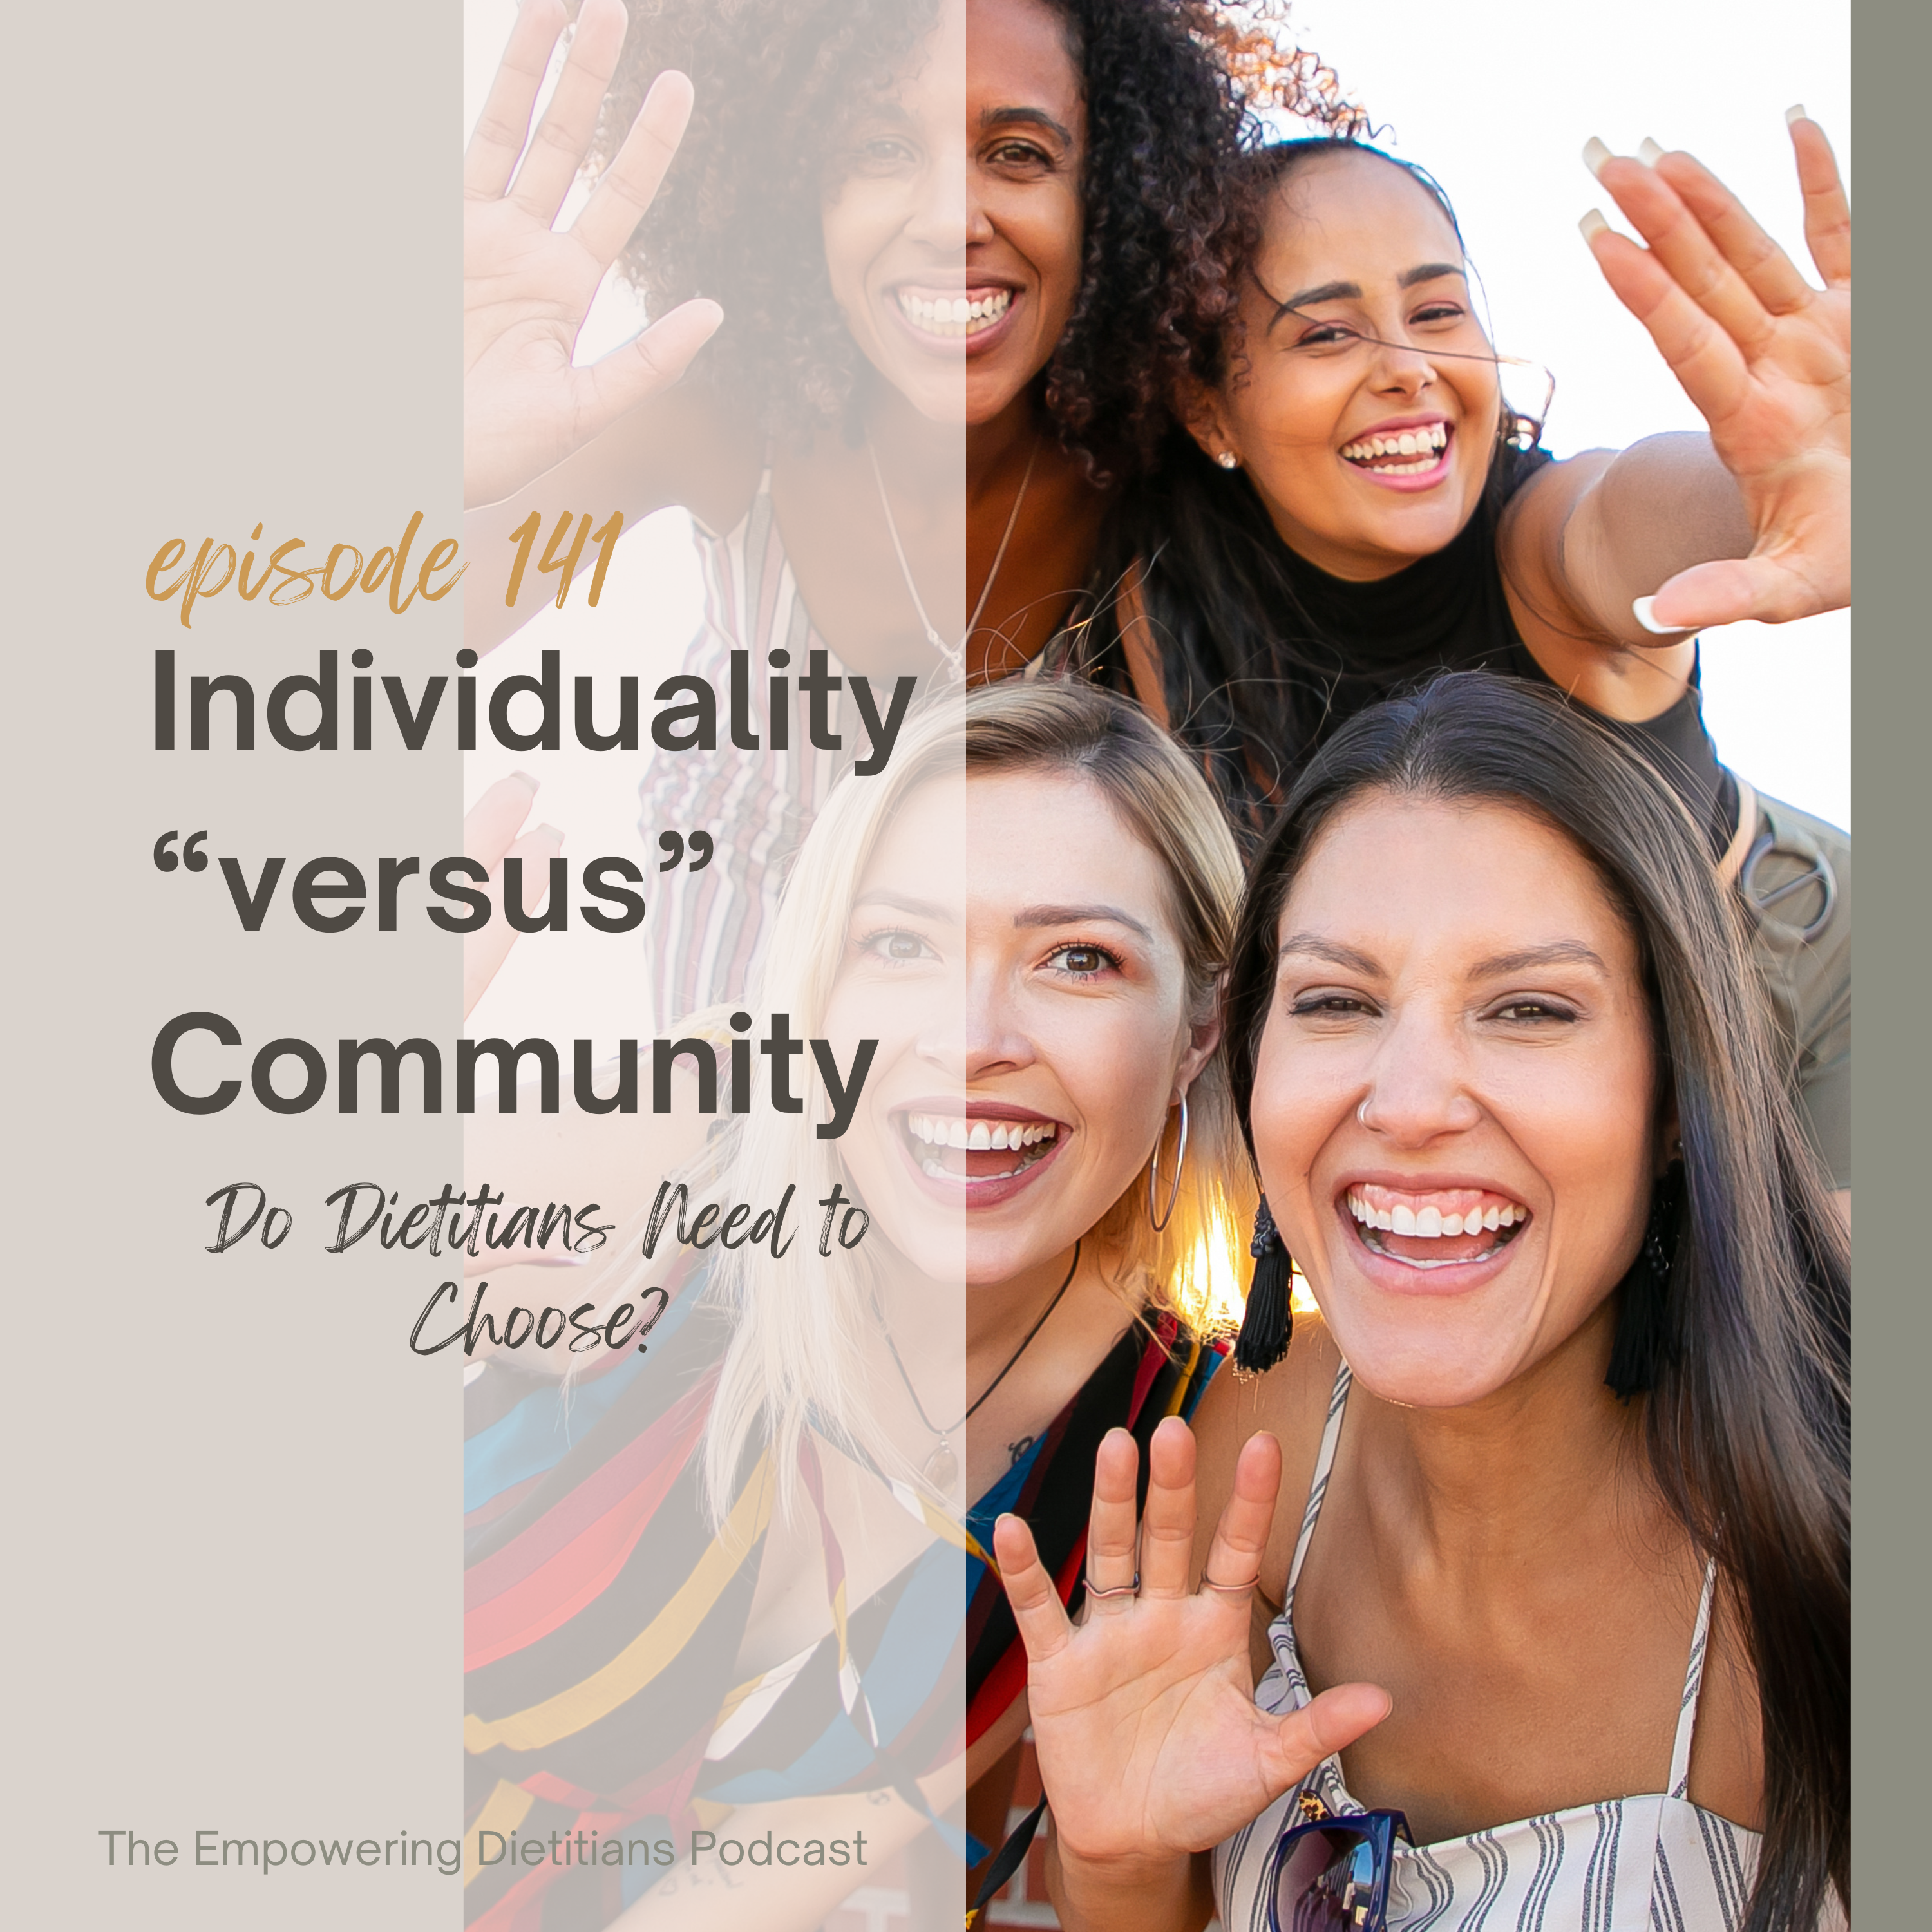 Individuality "versus" Community: Do Dietitians Have to Choose?